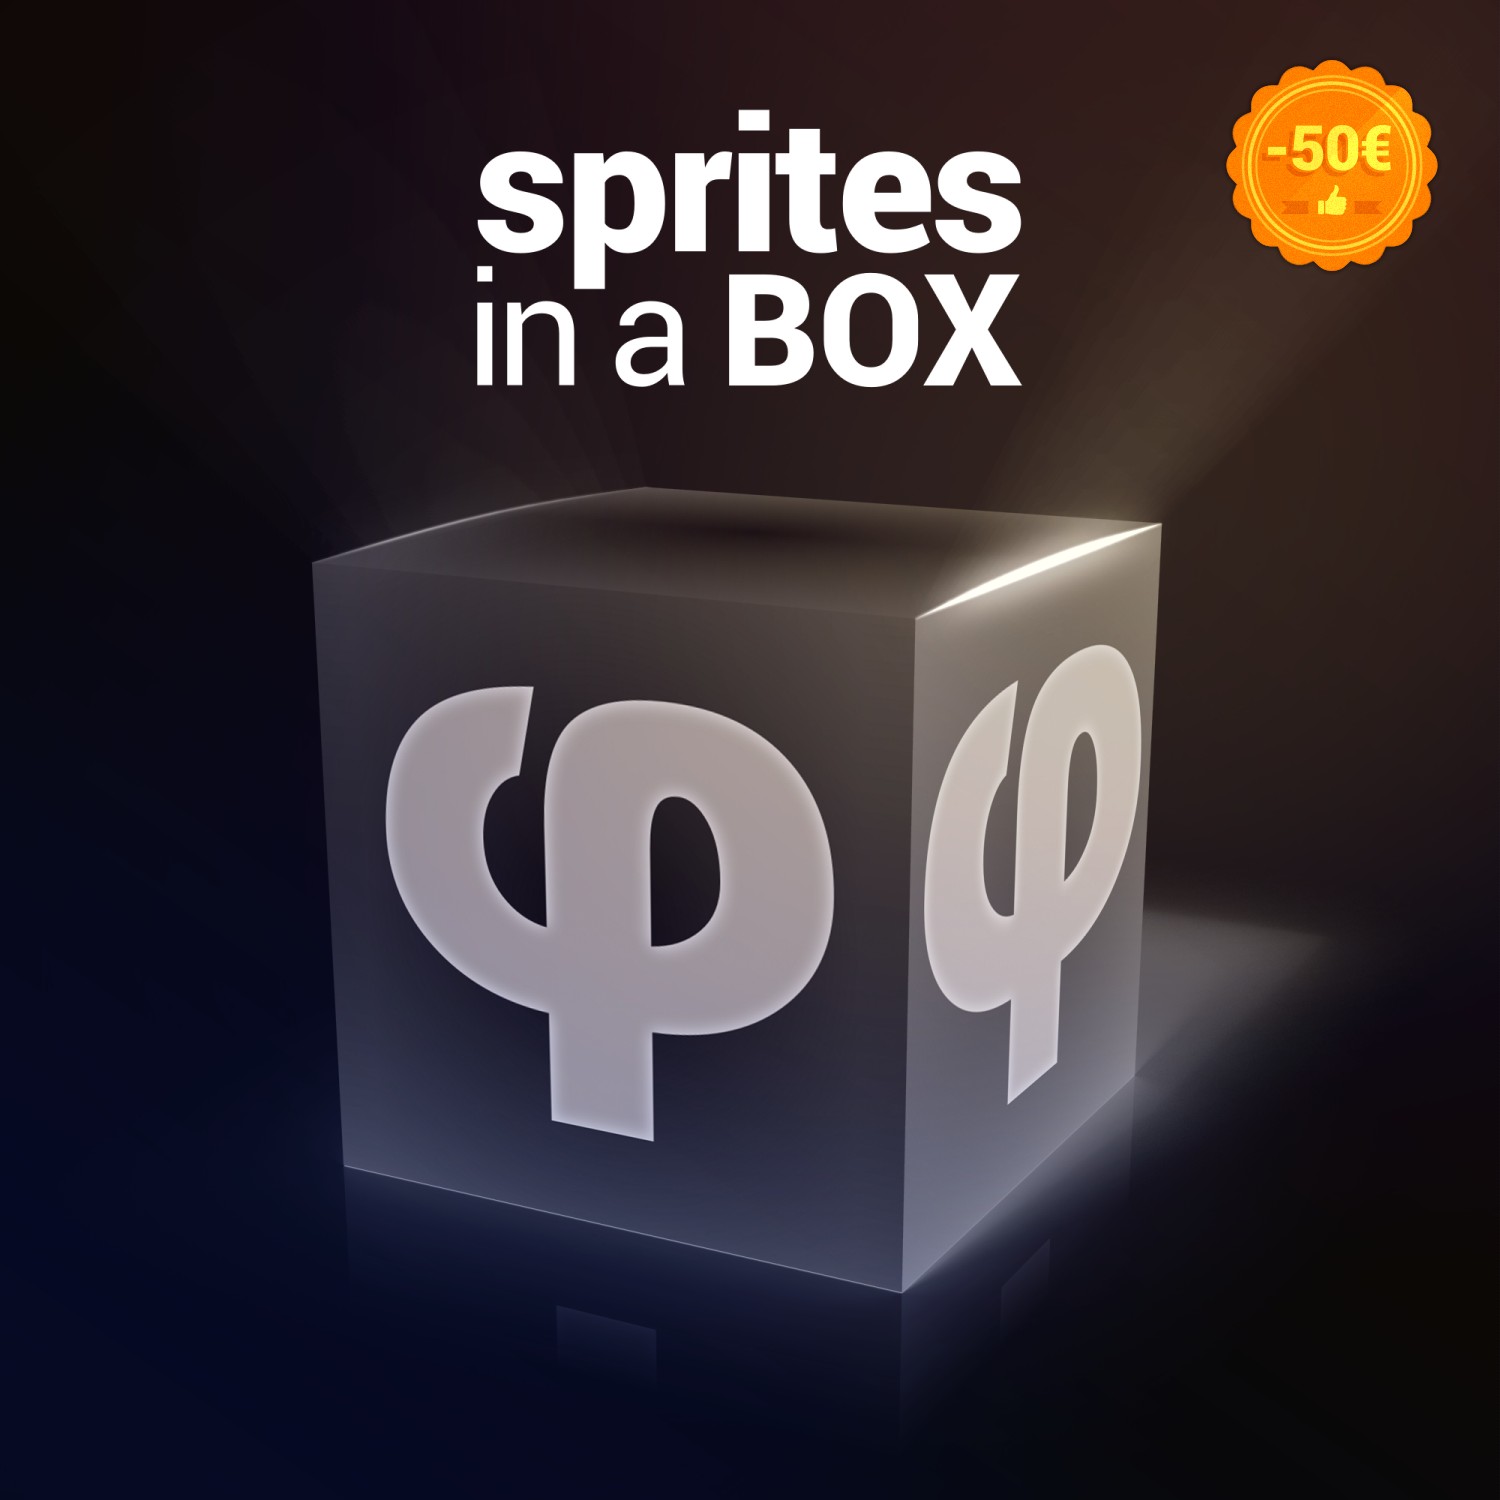 Royalty Free content pack - Sprites in a BOX Bundle - We supply the sprites, you supply the games!